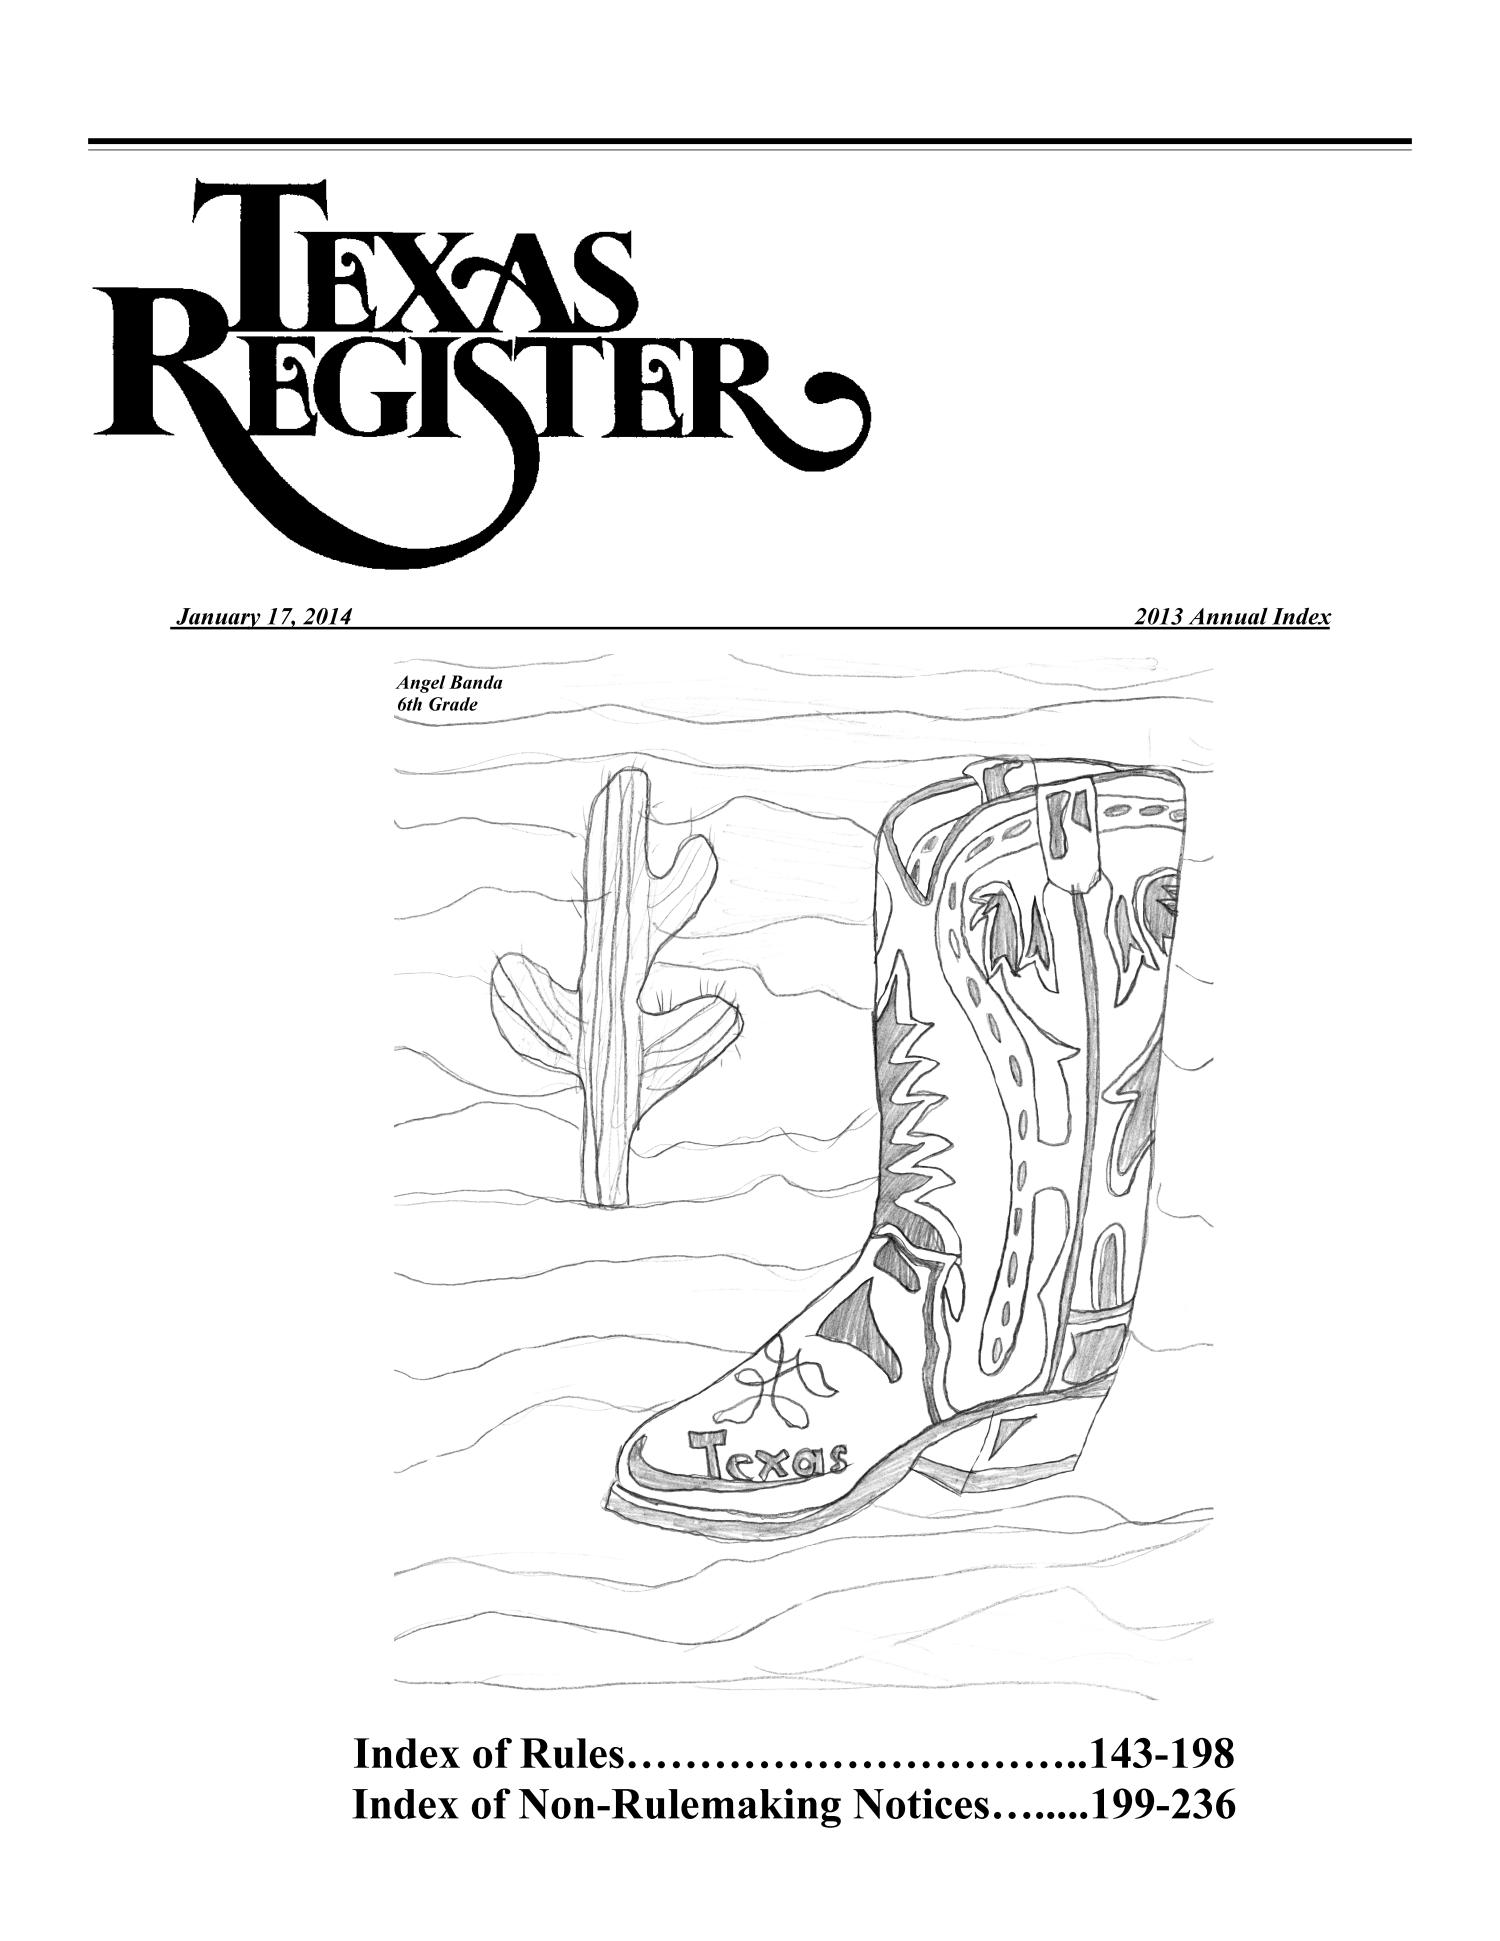 Texas Register, Volume 38, 2013 Annual Index, Pages 143-236, January 17, 2014
                                                
                                                    Title Page
                                                